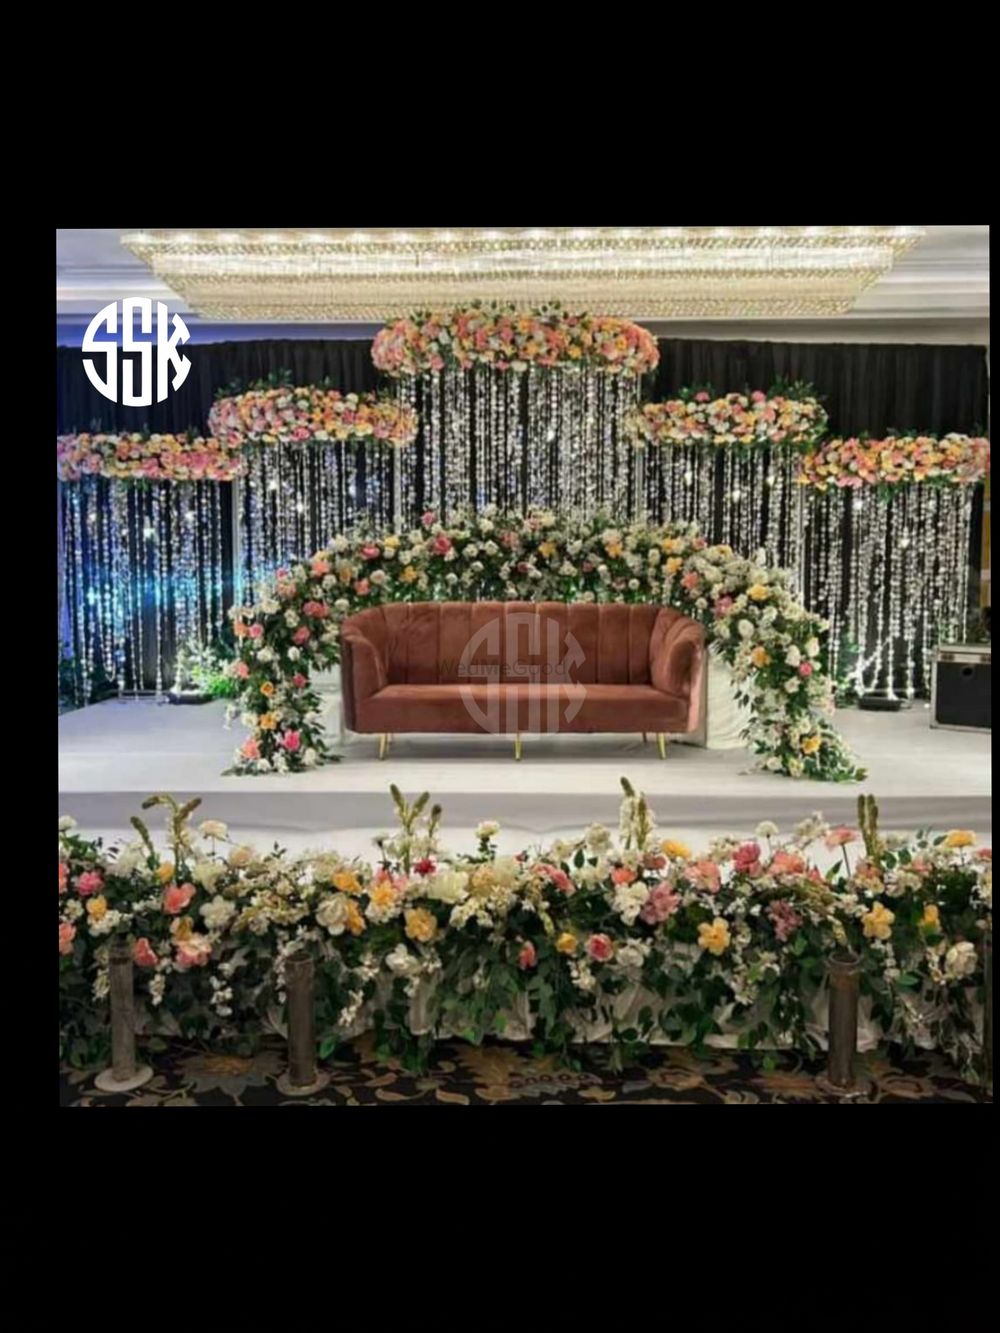 Photo By SSK Events Planner - Wedding Planners